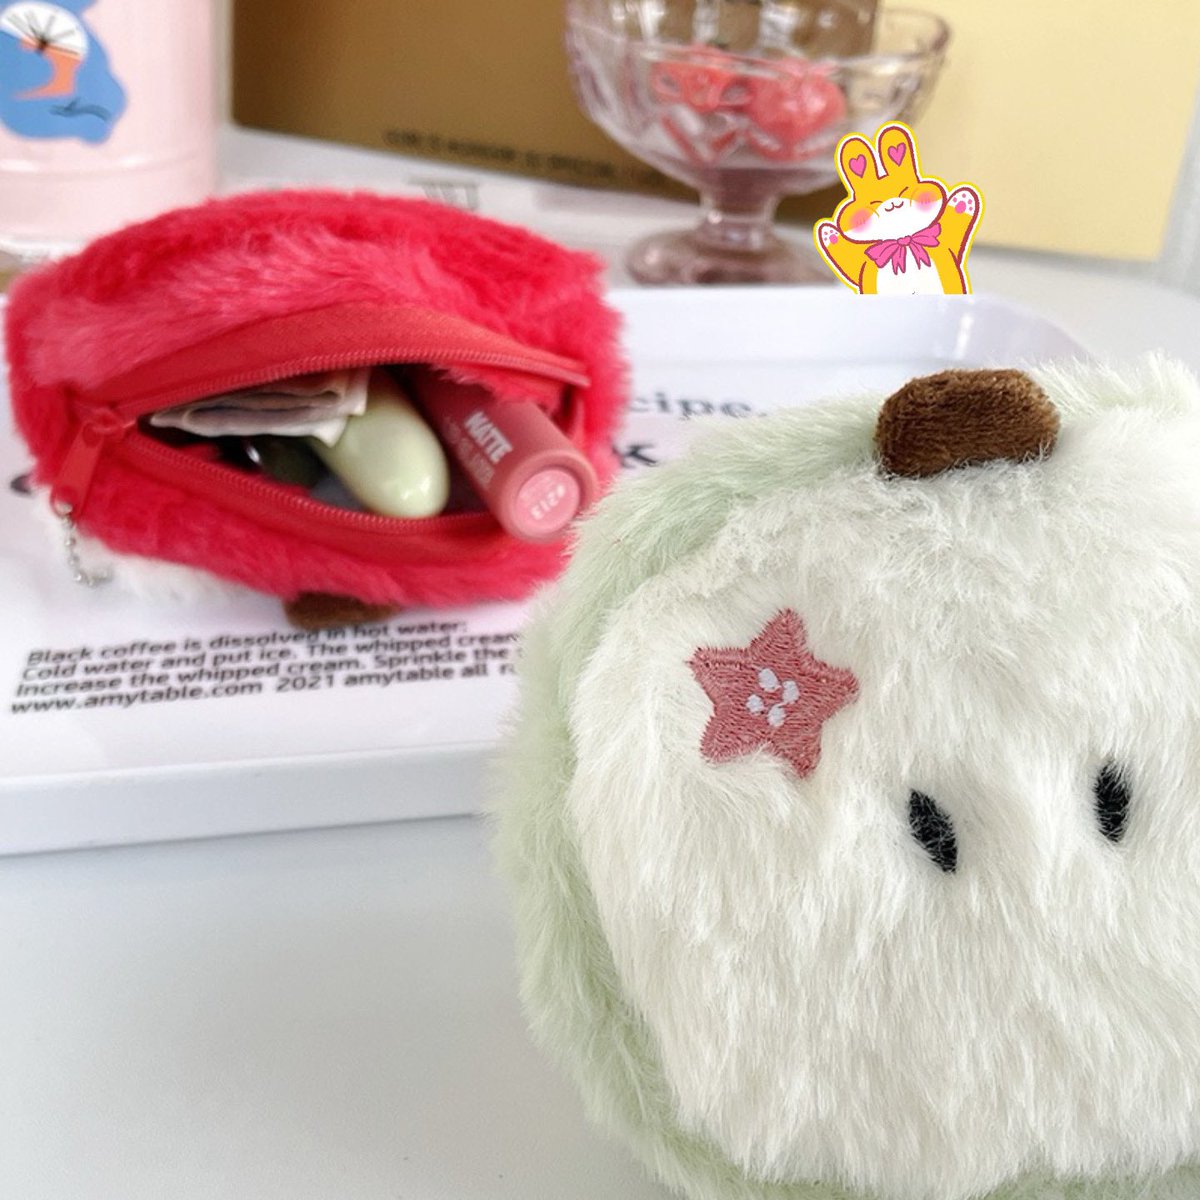 🍎➕👀➕👛➕✨🟰❓

twinkleforest.com
Free shipping over $69 to all of CA🇨🇦&USA🇺🇸

#twinkleforeststudio #giftideas #fluffy #apple #toronto #canada #cutestyle #appleproducts #pouch #smallbag #usa #airpodscase #coinpurse